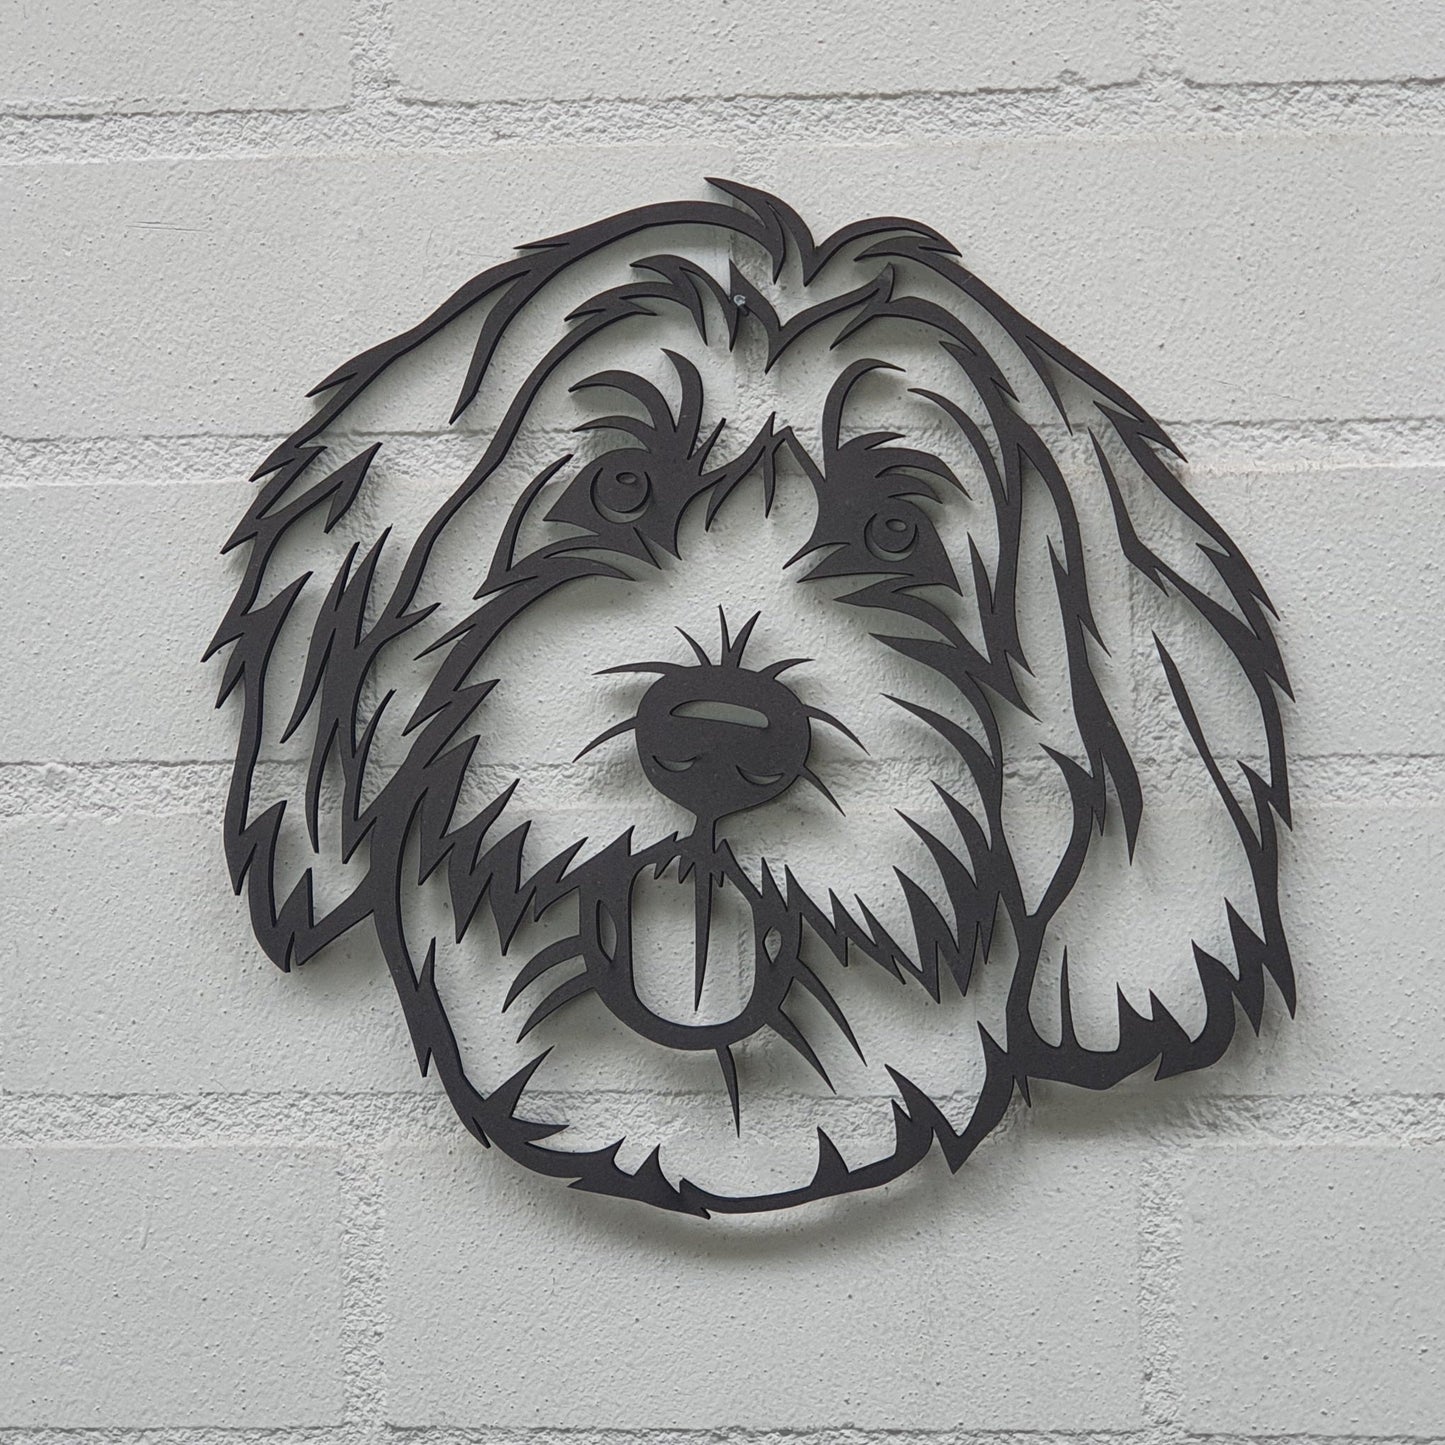 A unique wall decoration of your own pet!